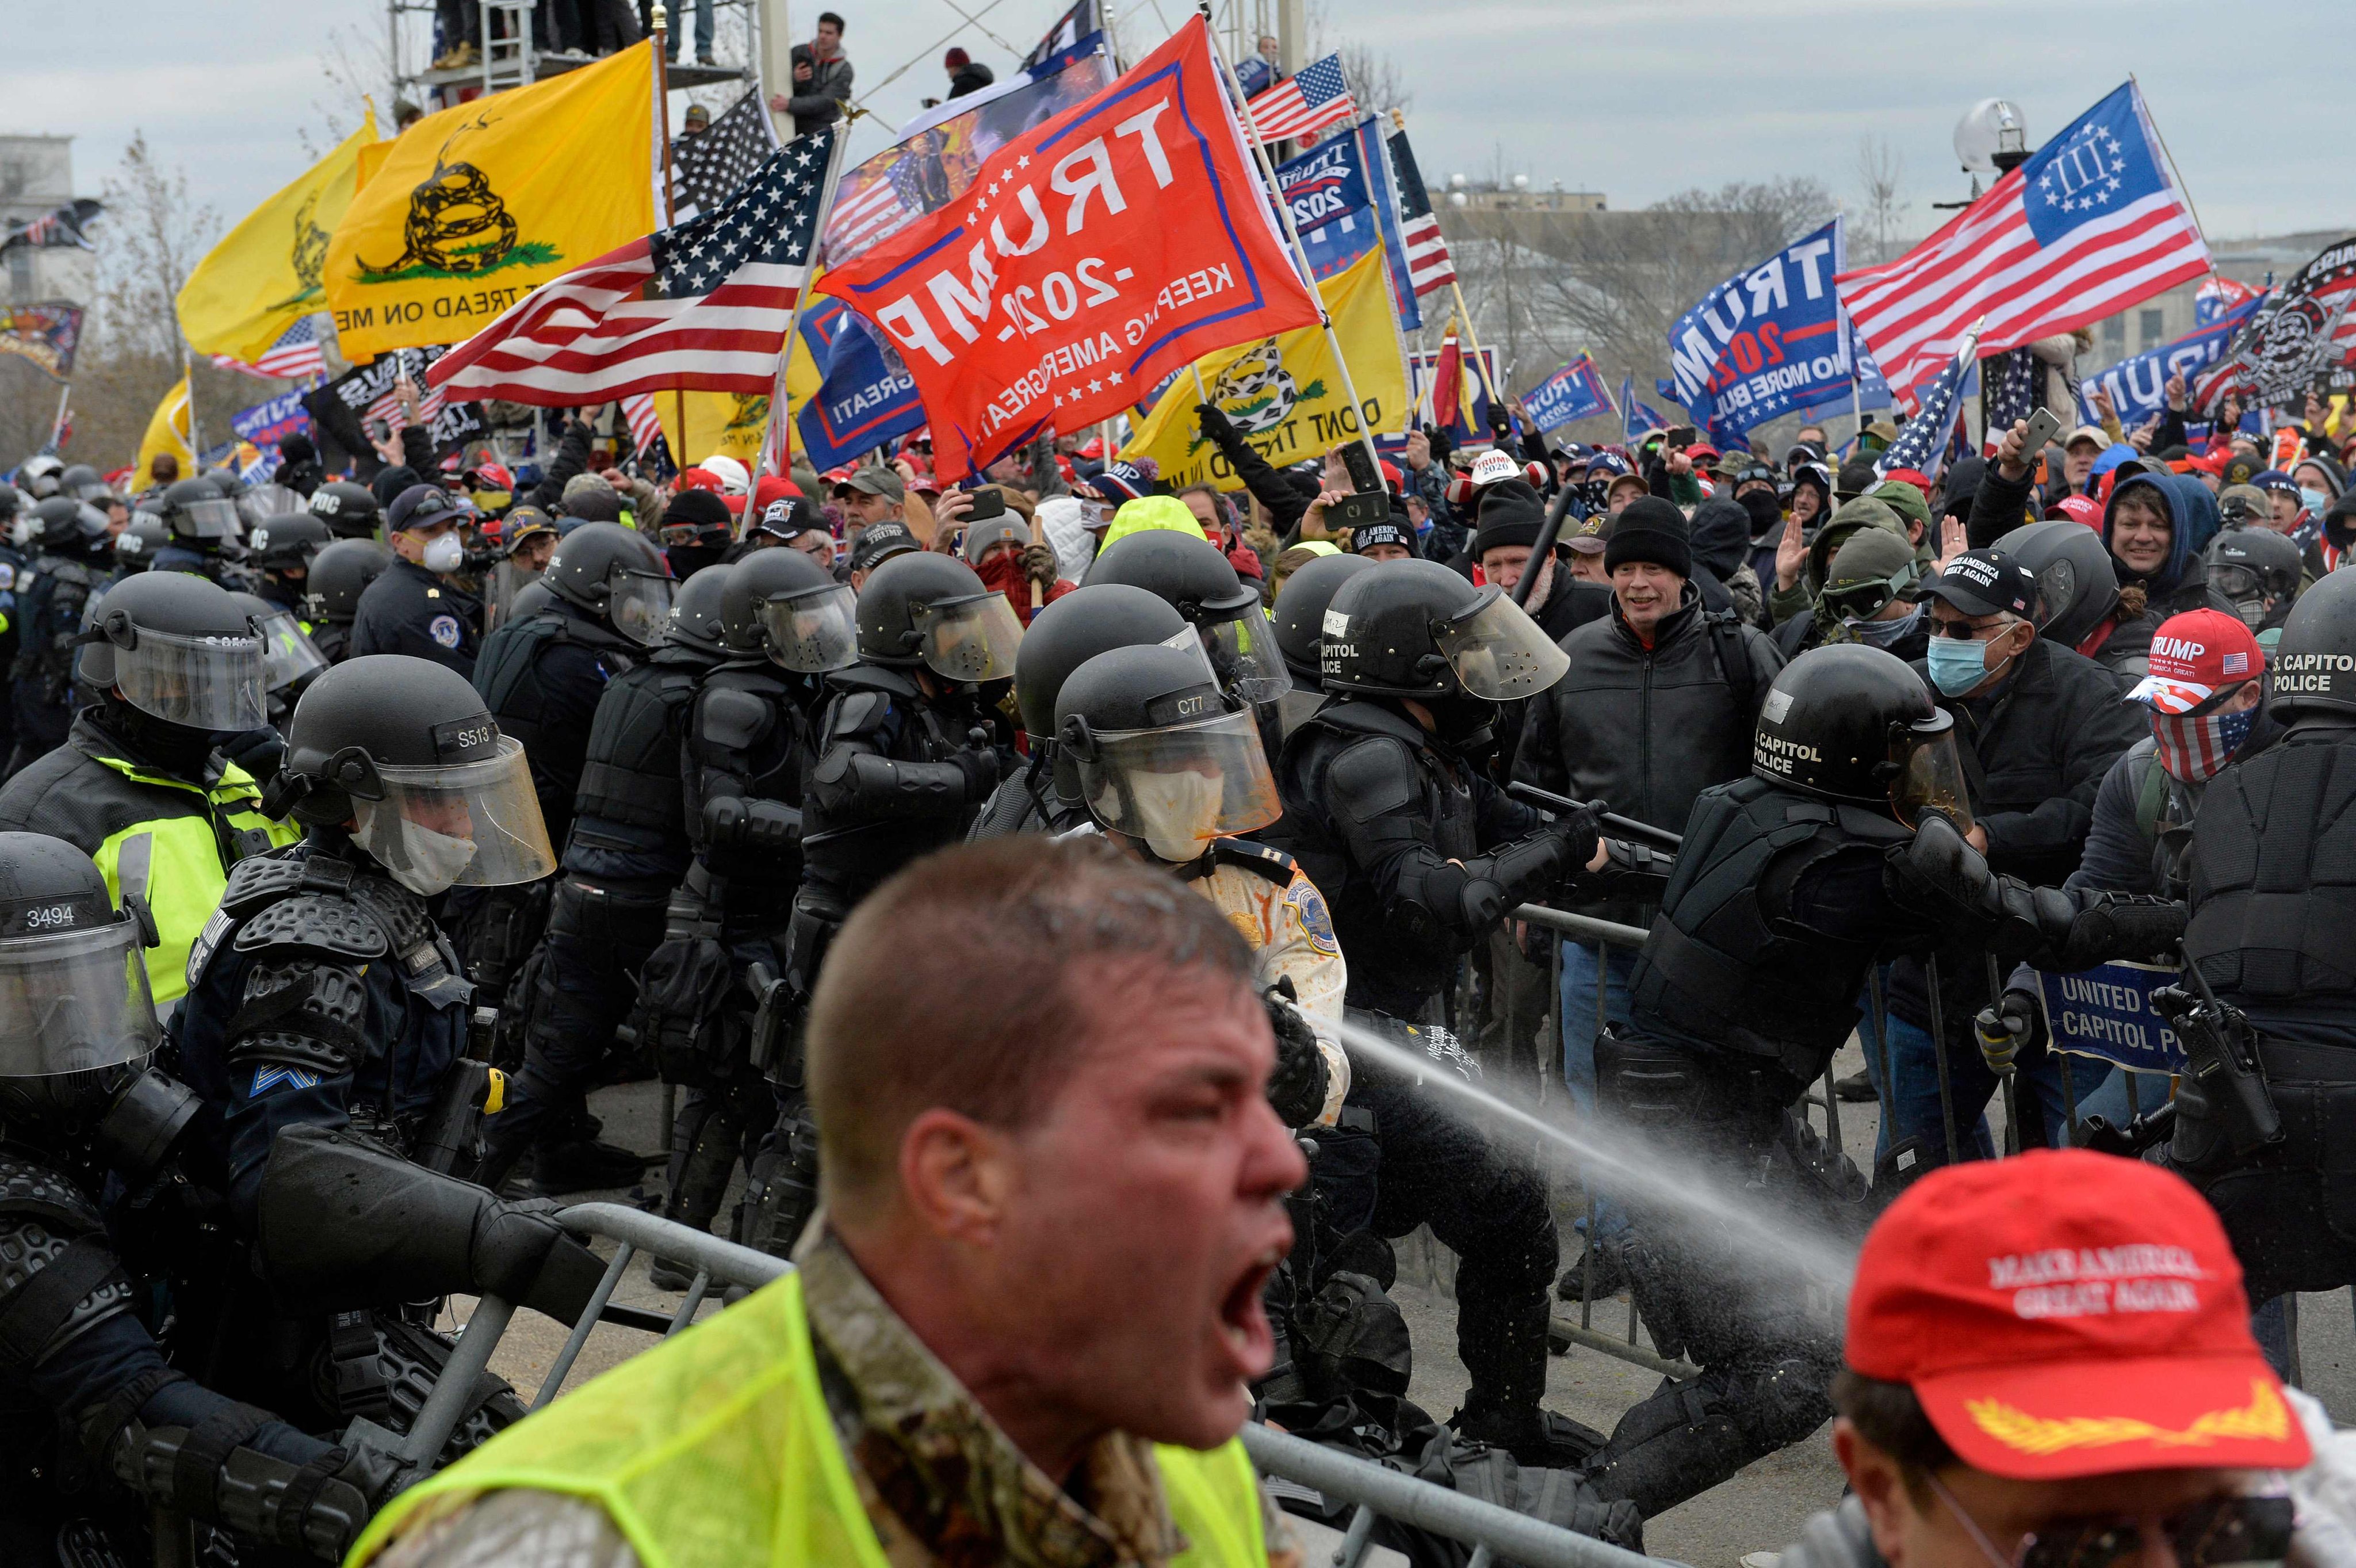 Donald Trump supporters clash with police and security forces as people try to storm the US Capitol in Washington on January 6, 2021. Photo: AFP